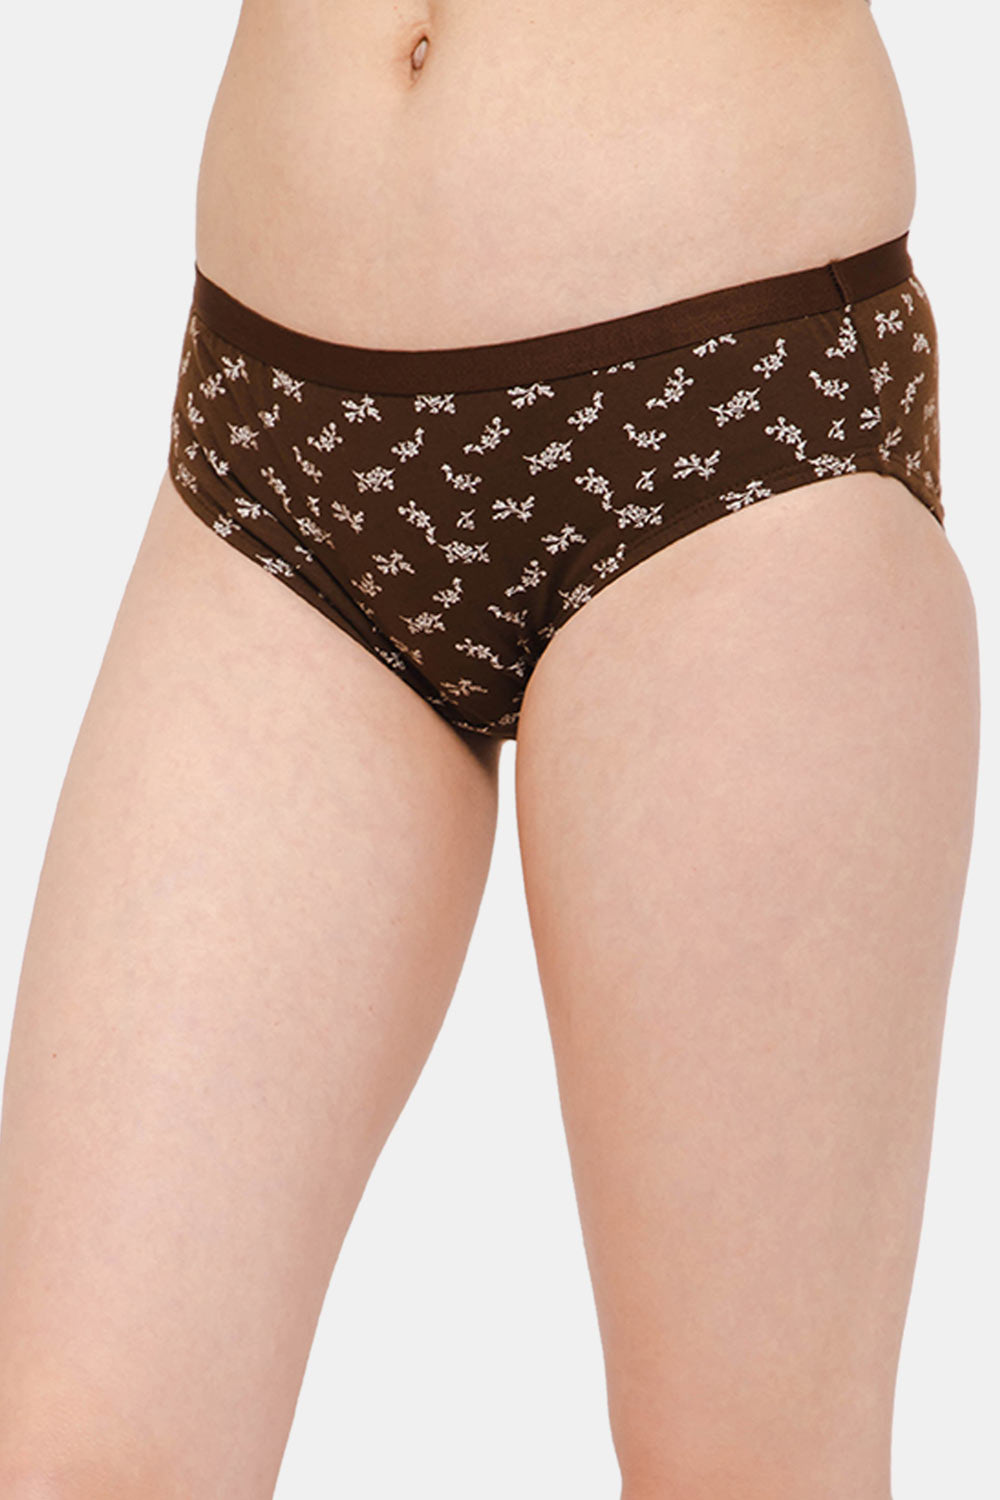 Intimacy Classic Dark Printed Panty - Outer Elastic -Pack of 3 Size   M Color REGULAR_PANTIES